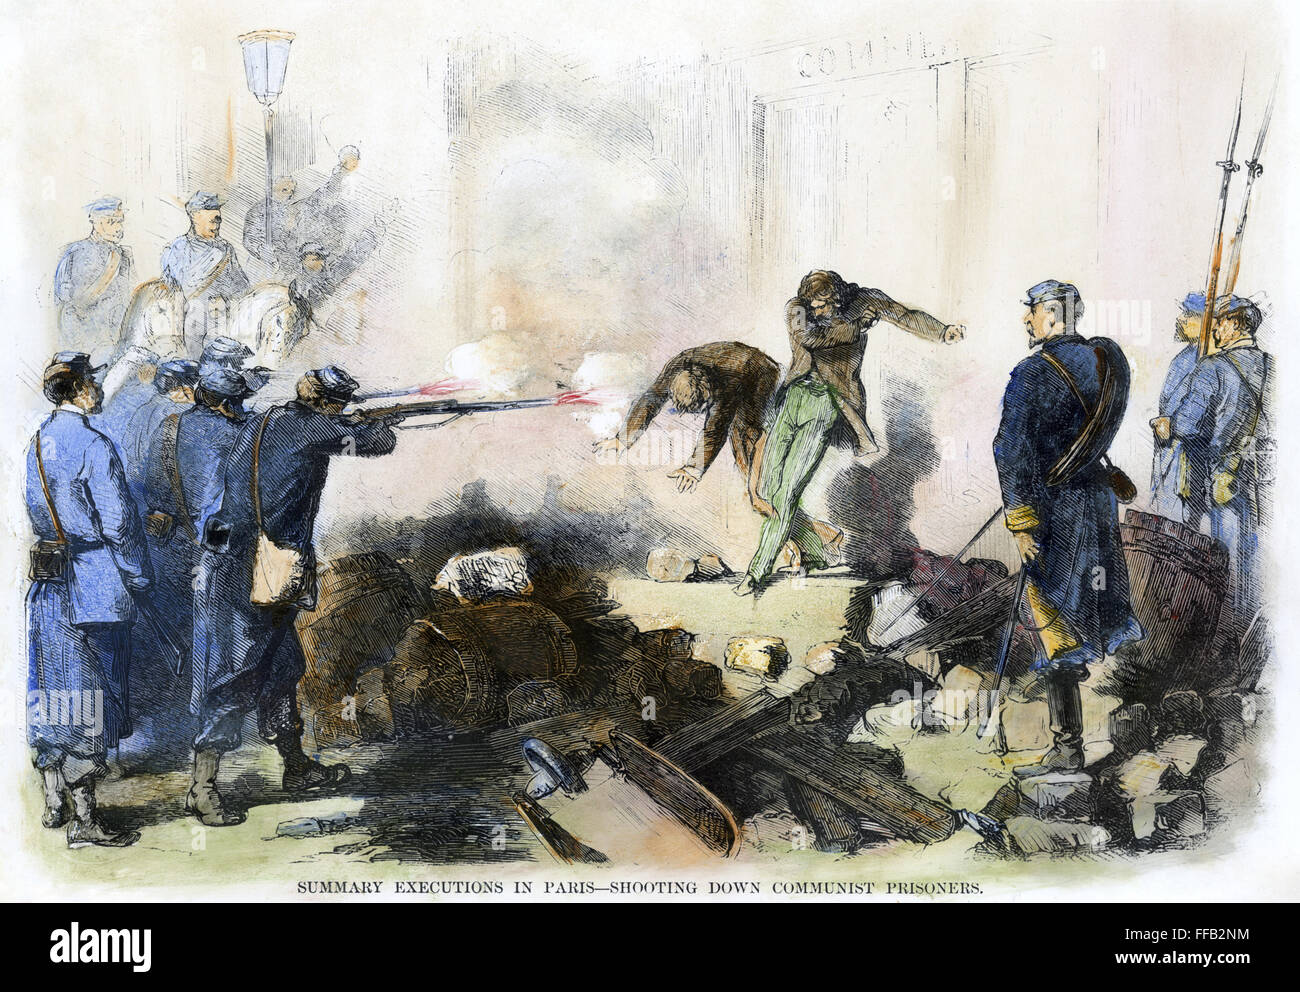 PARIS COMMUNE, 1871. /n'Summary executions in Paris. Shooting down communist prisoners.' Colored engraving from a contemporary American newspaper. Stock Photo